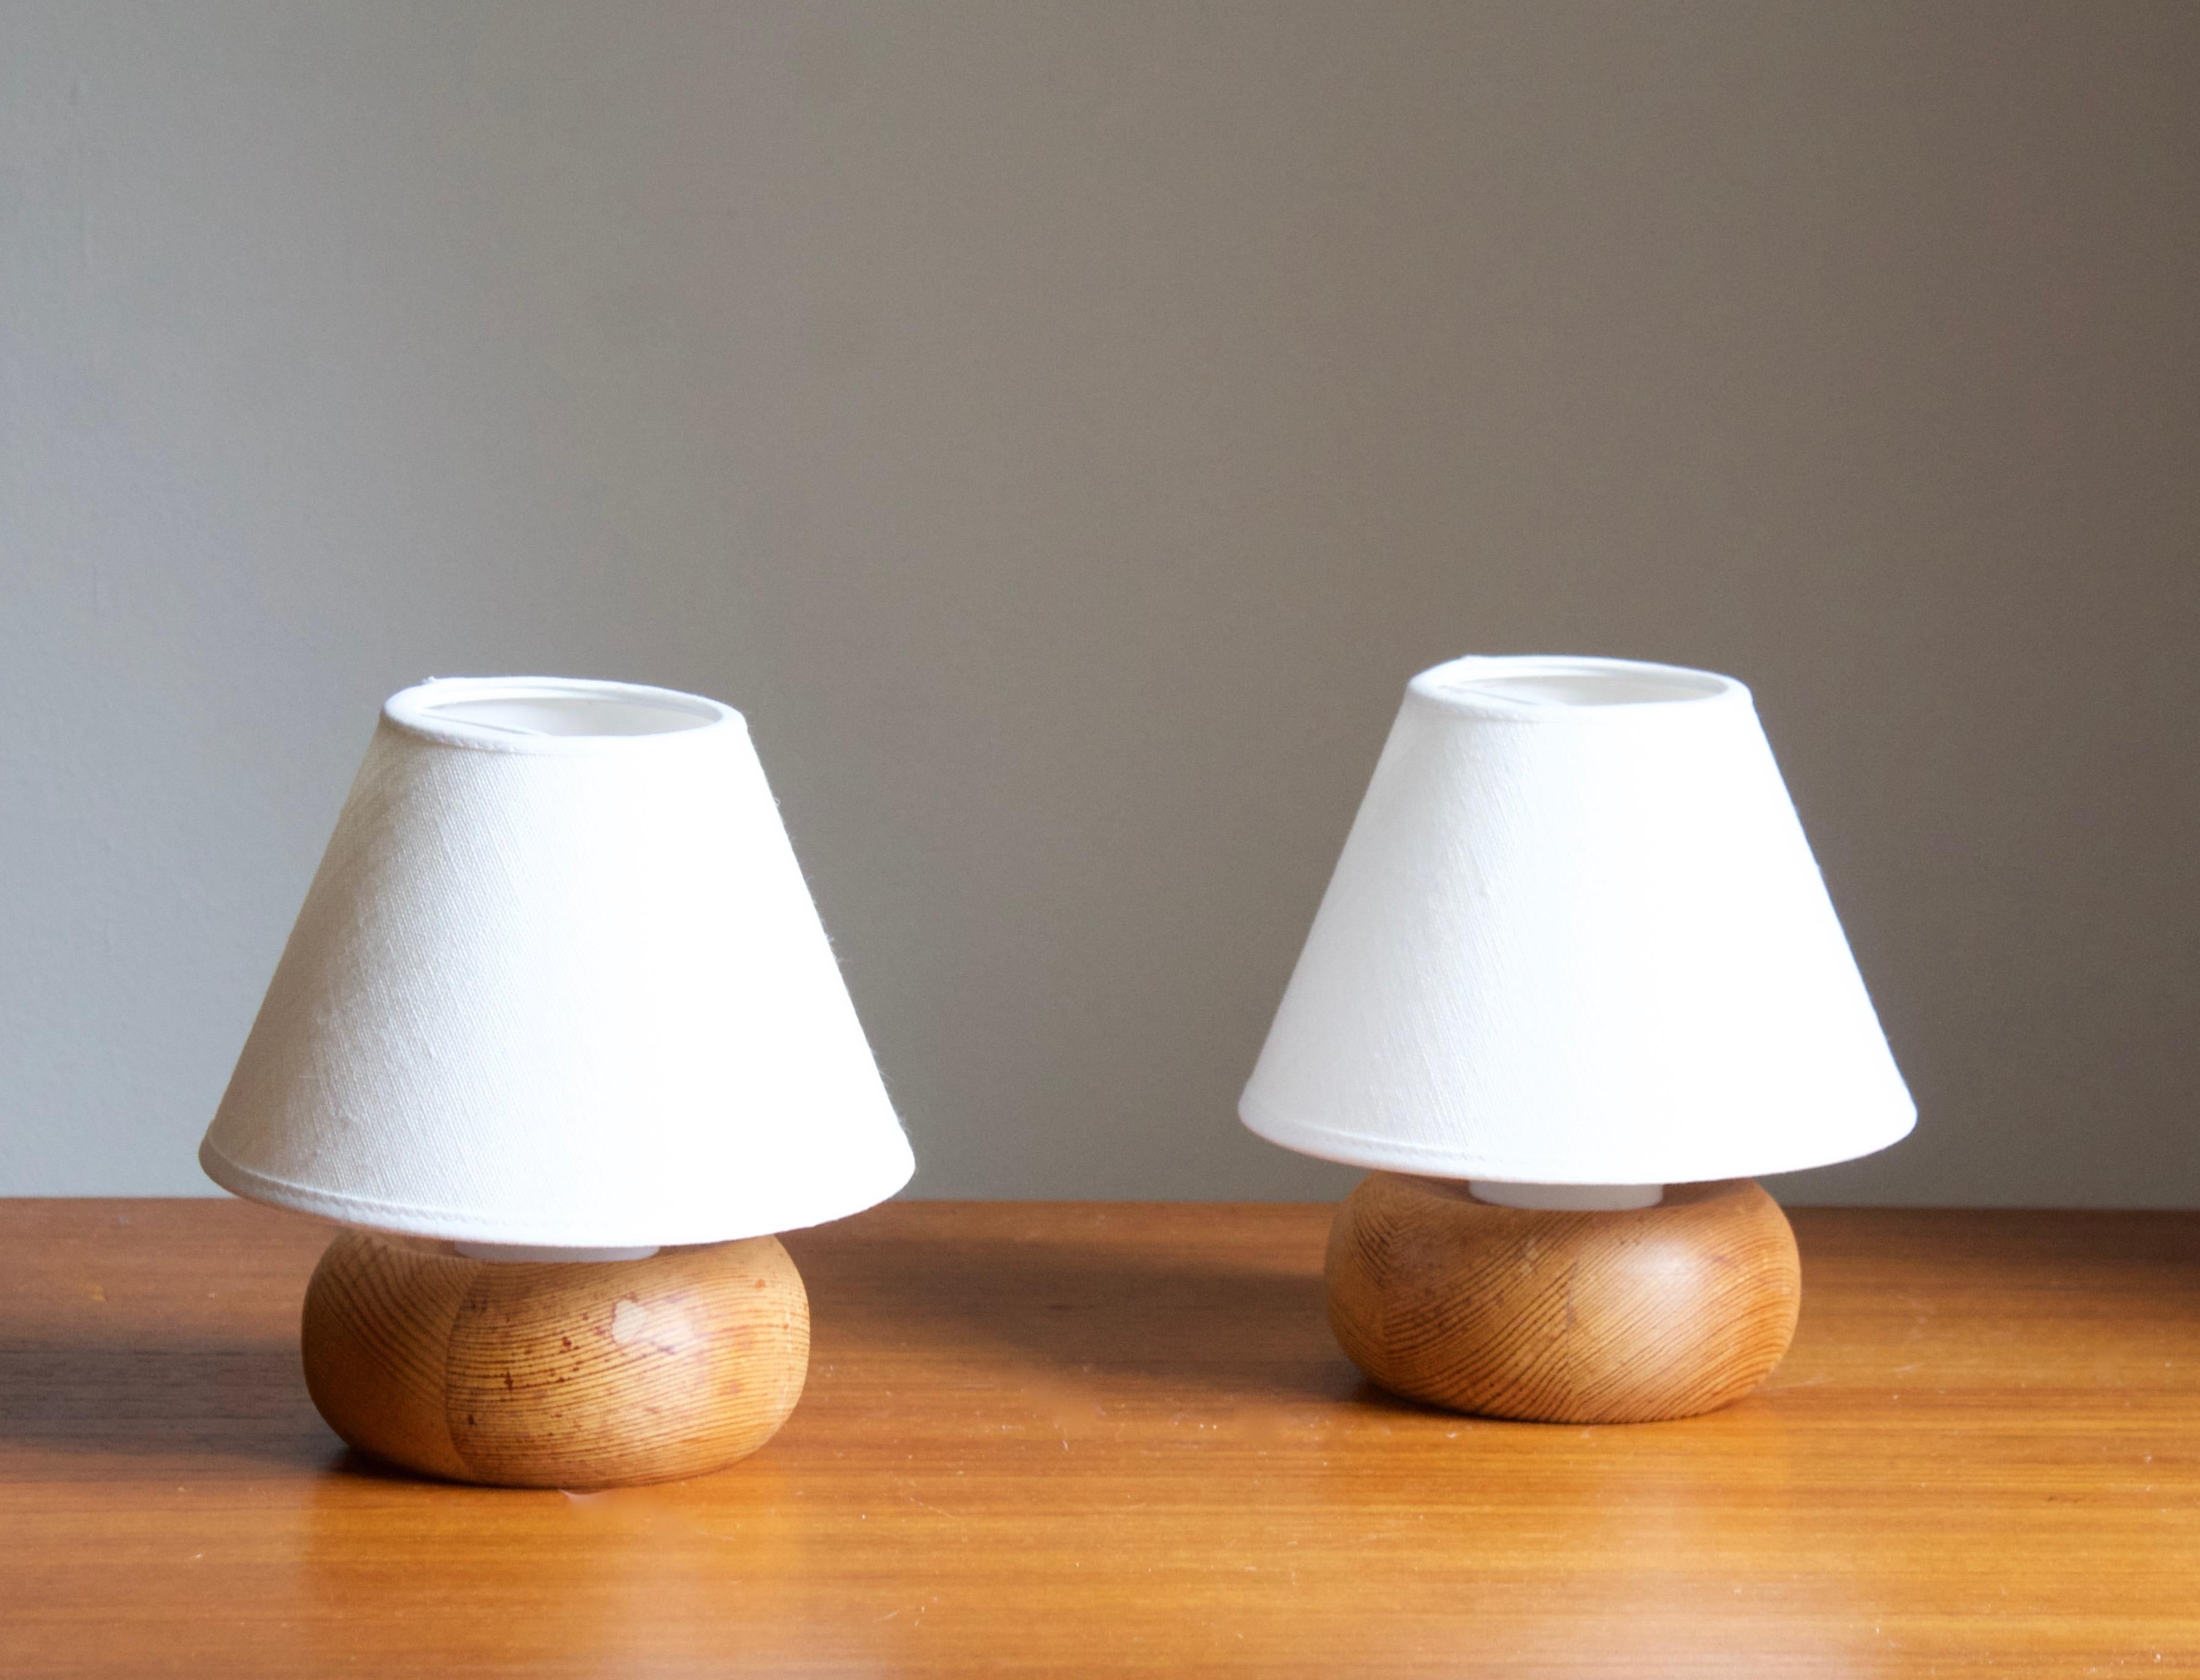 A pair of small table lamps, designed and produced by Nils H. Ledung, Studio, Bankeryd Sweden, 1960s.

Lampshades are included in purchase. Stated dimensions include lampshades as illustrated.